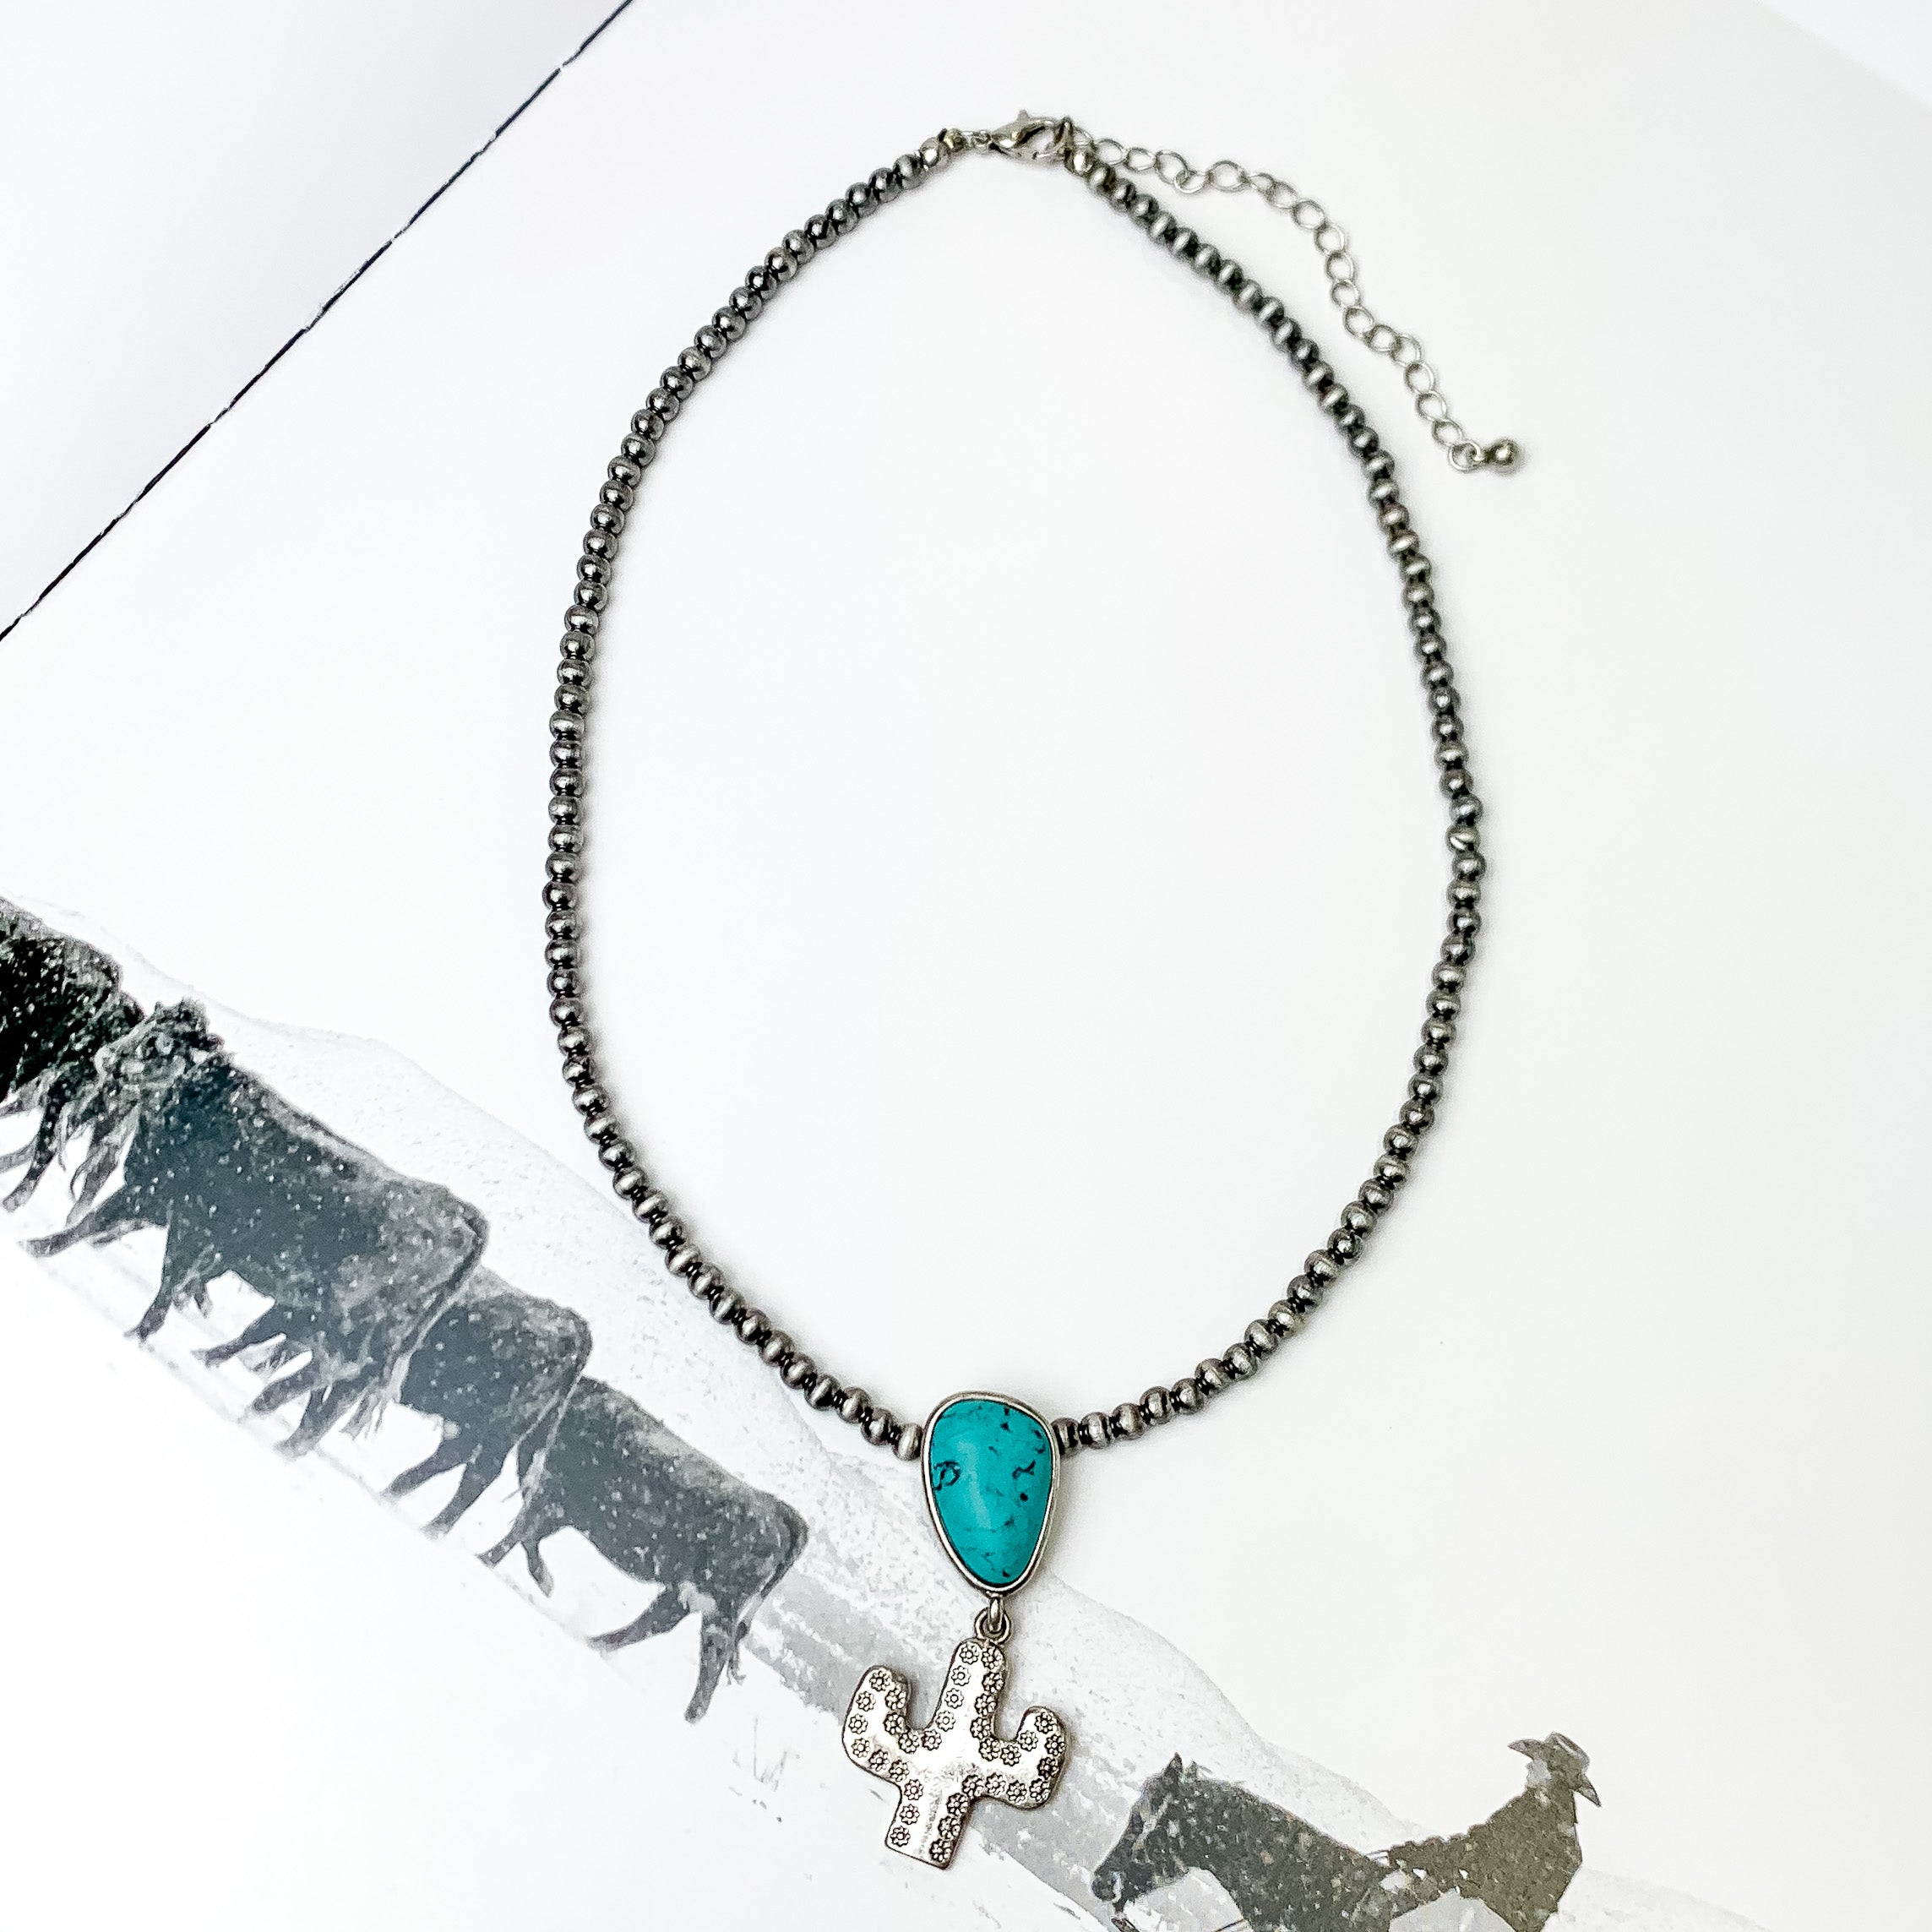 Cactus Queen Faux Navajo Silver Tone Necklace with Stone in Turquoise. Pictured on a white page with a cow scene printed on it.